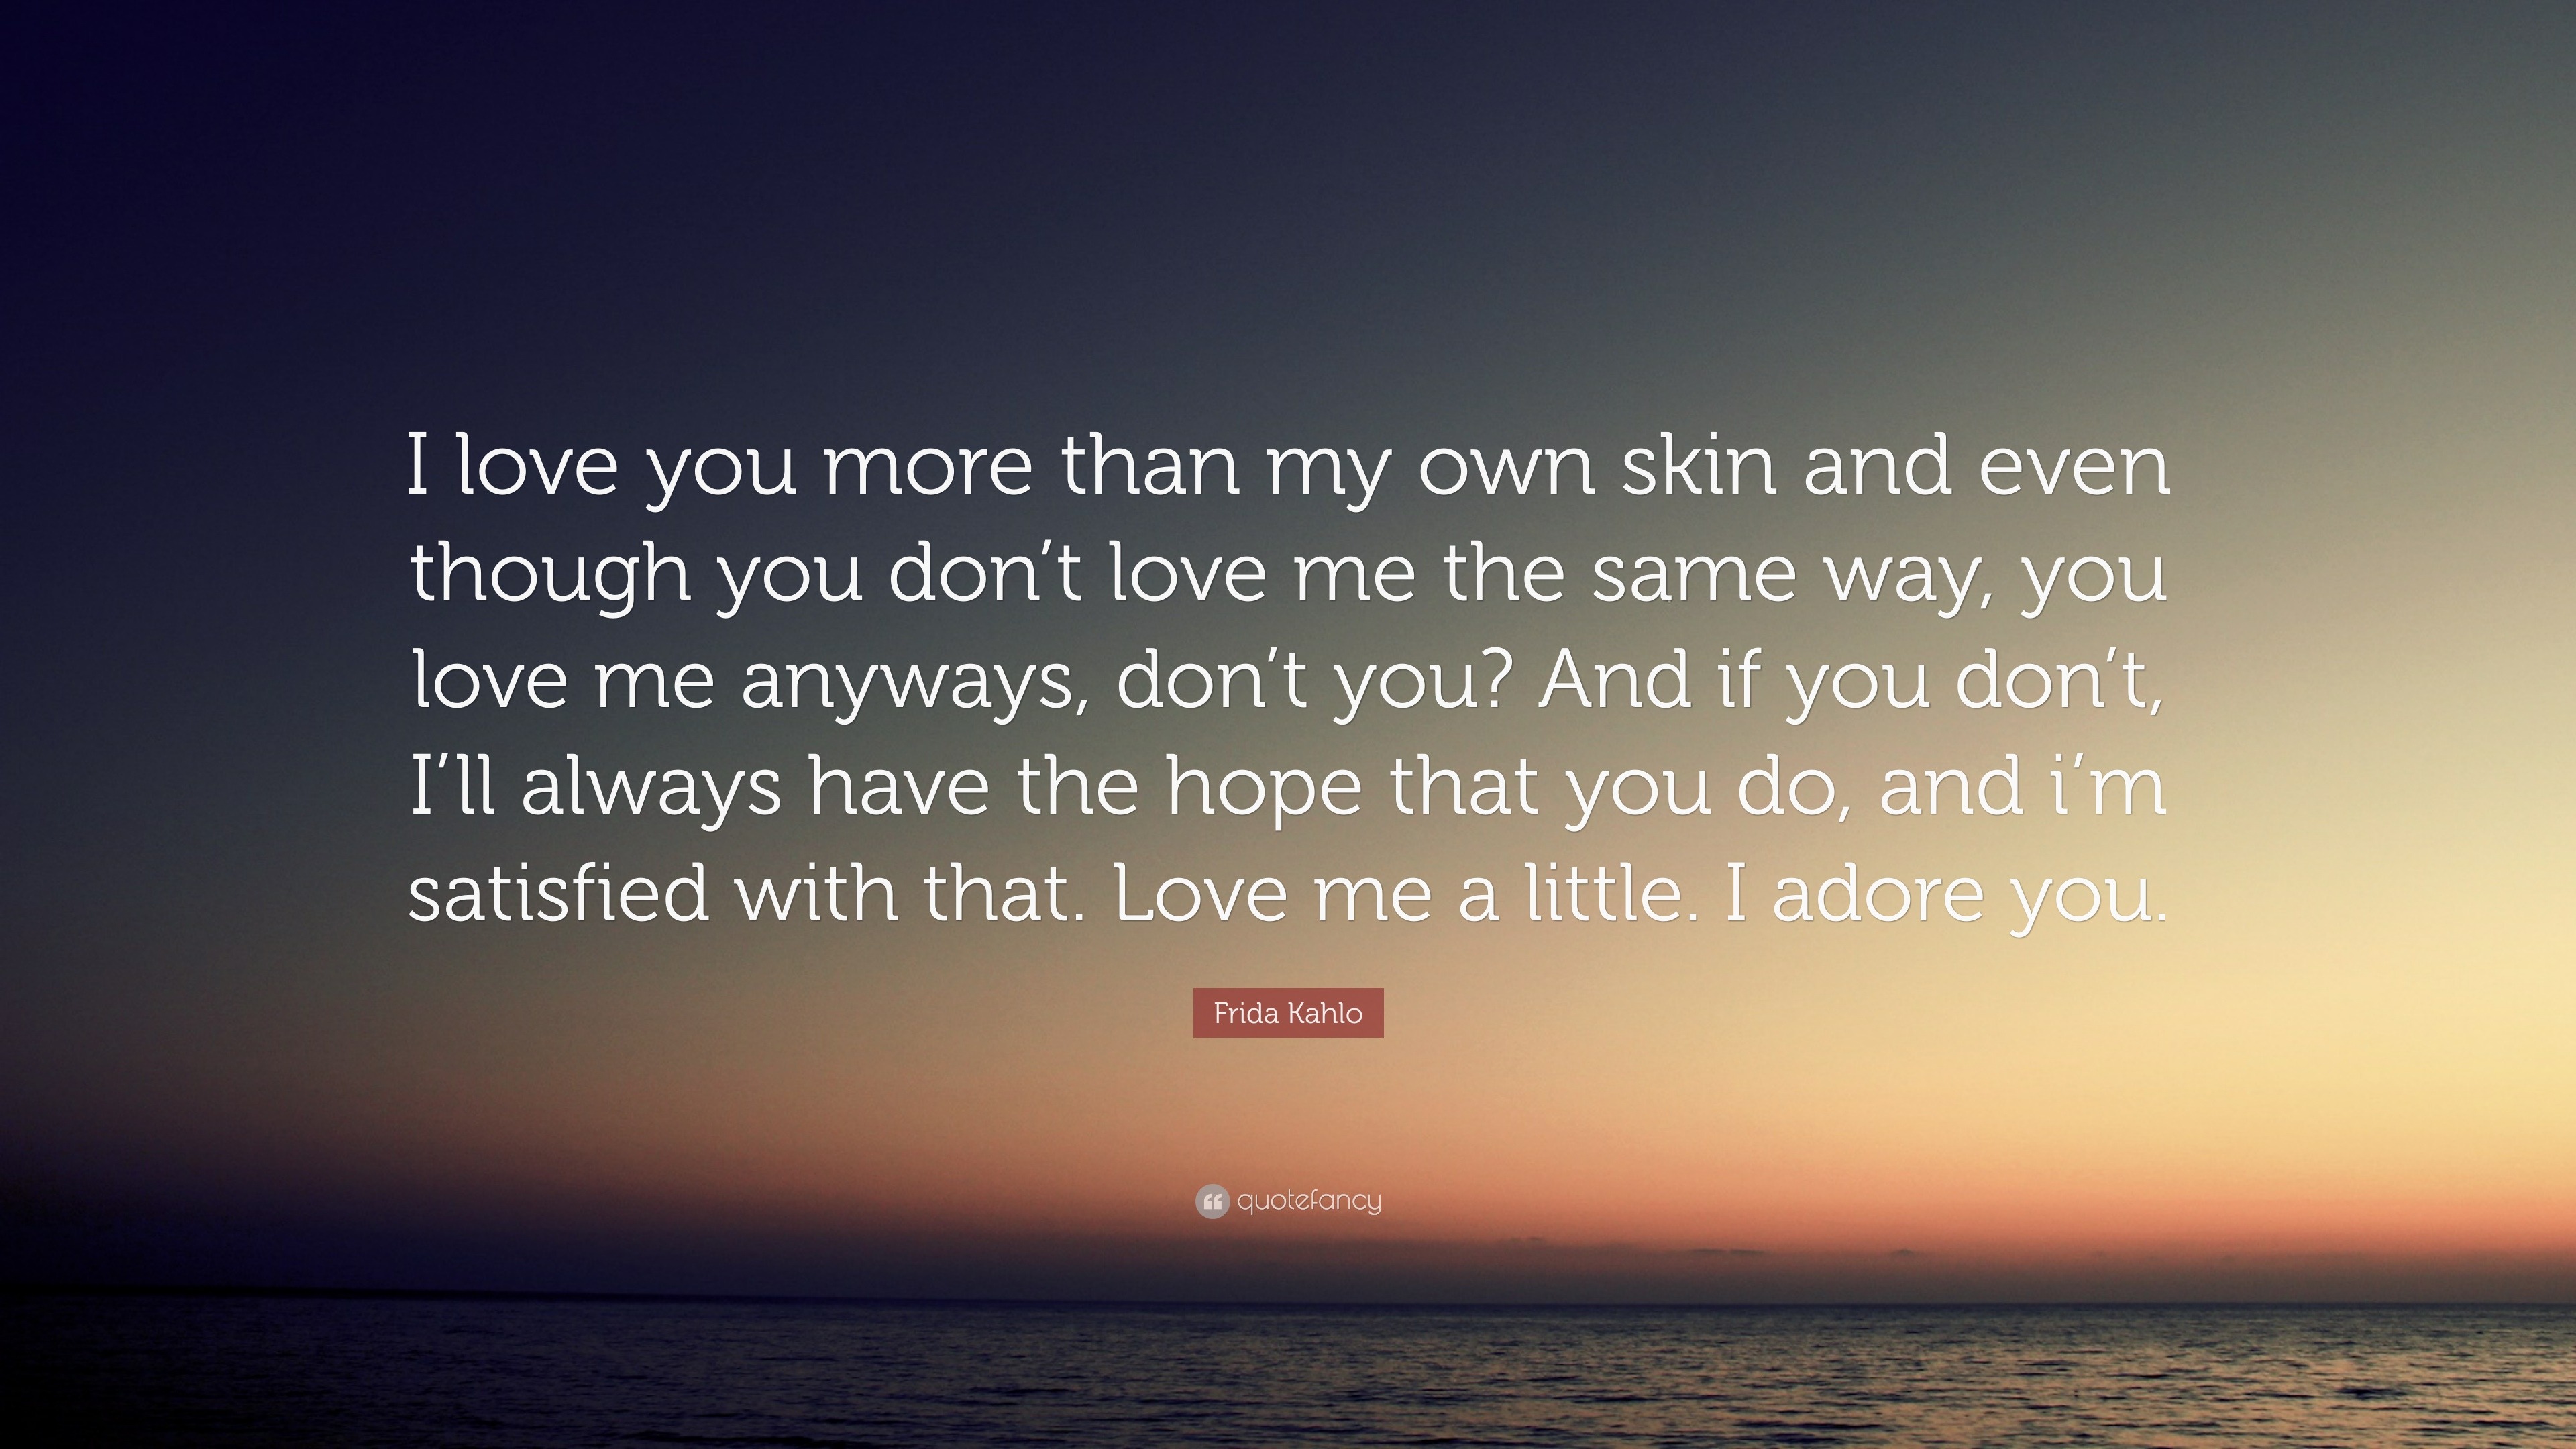 Frida Kahlo Quote: “I love you more than my own skin and even though ...